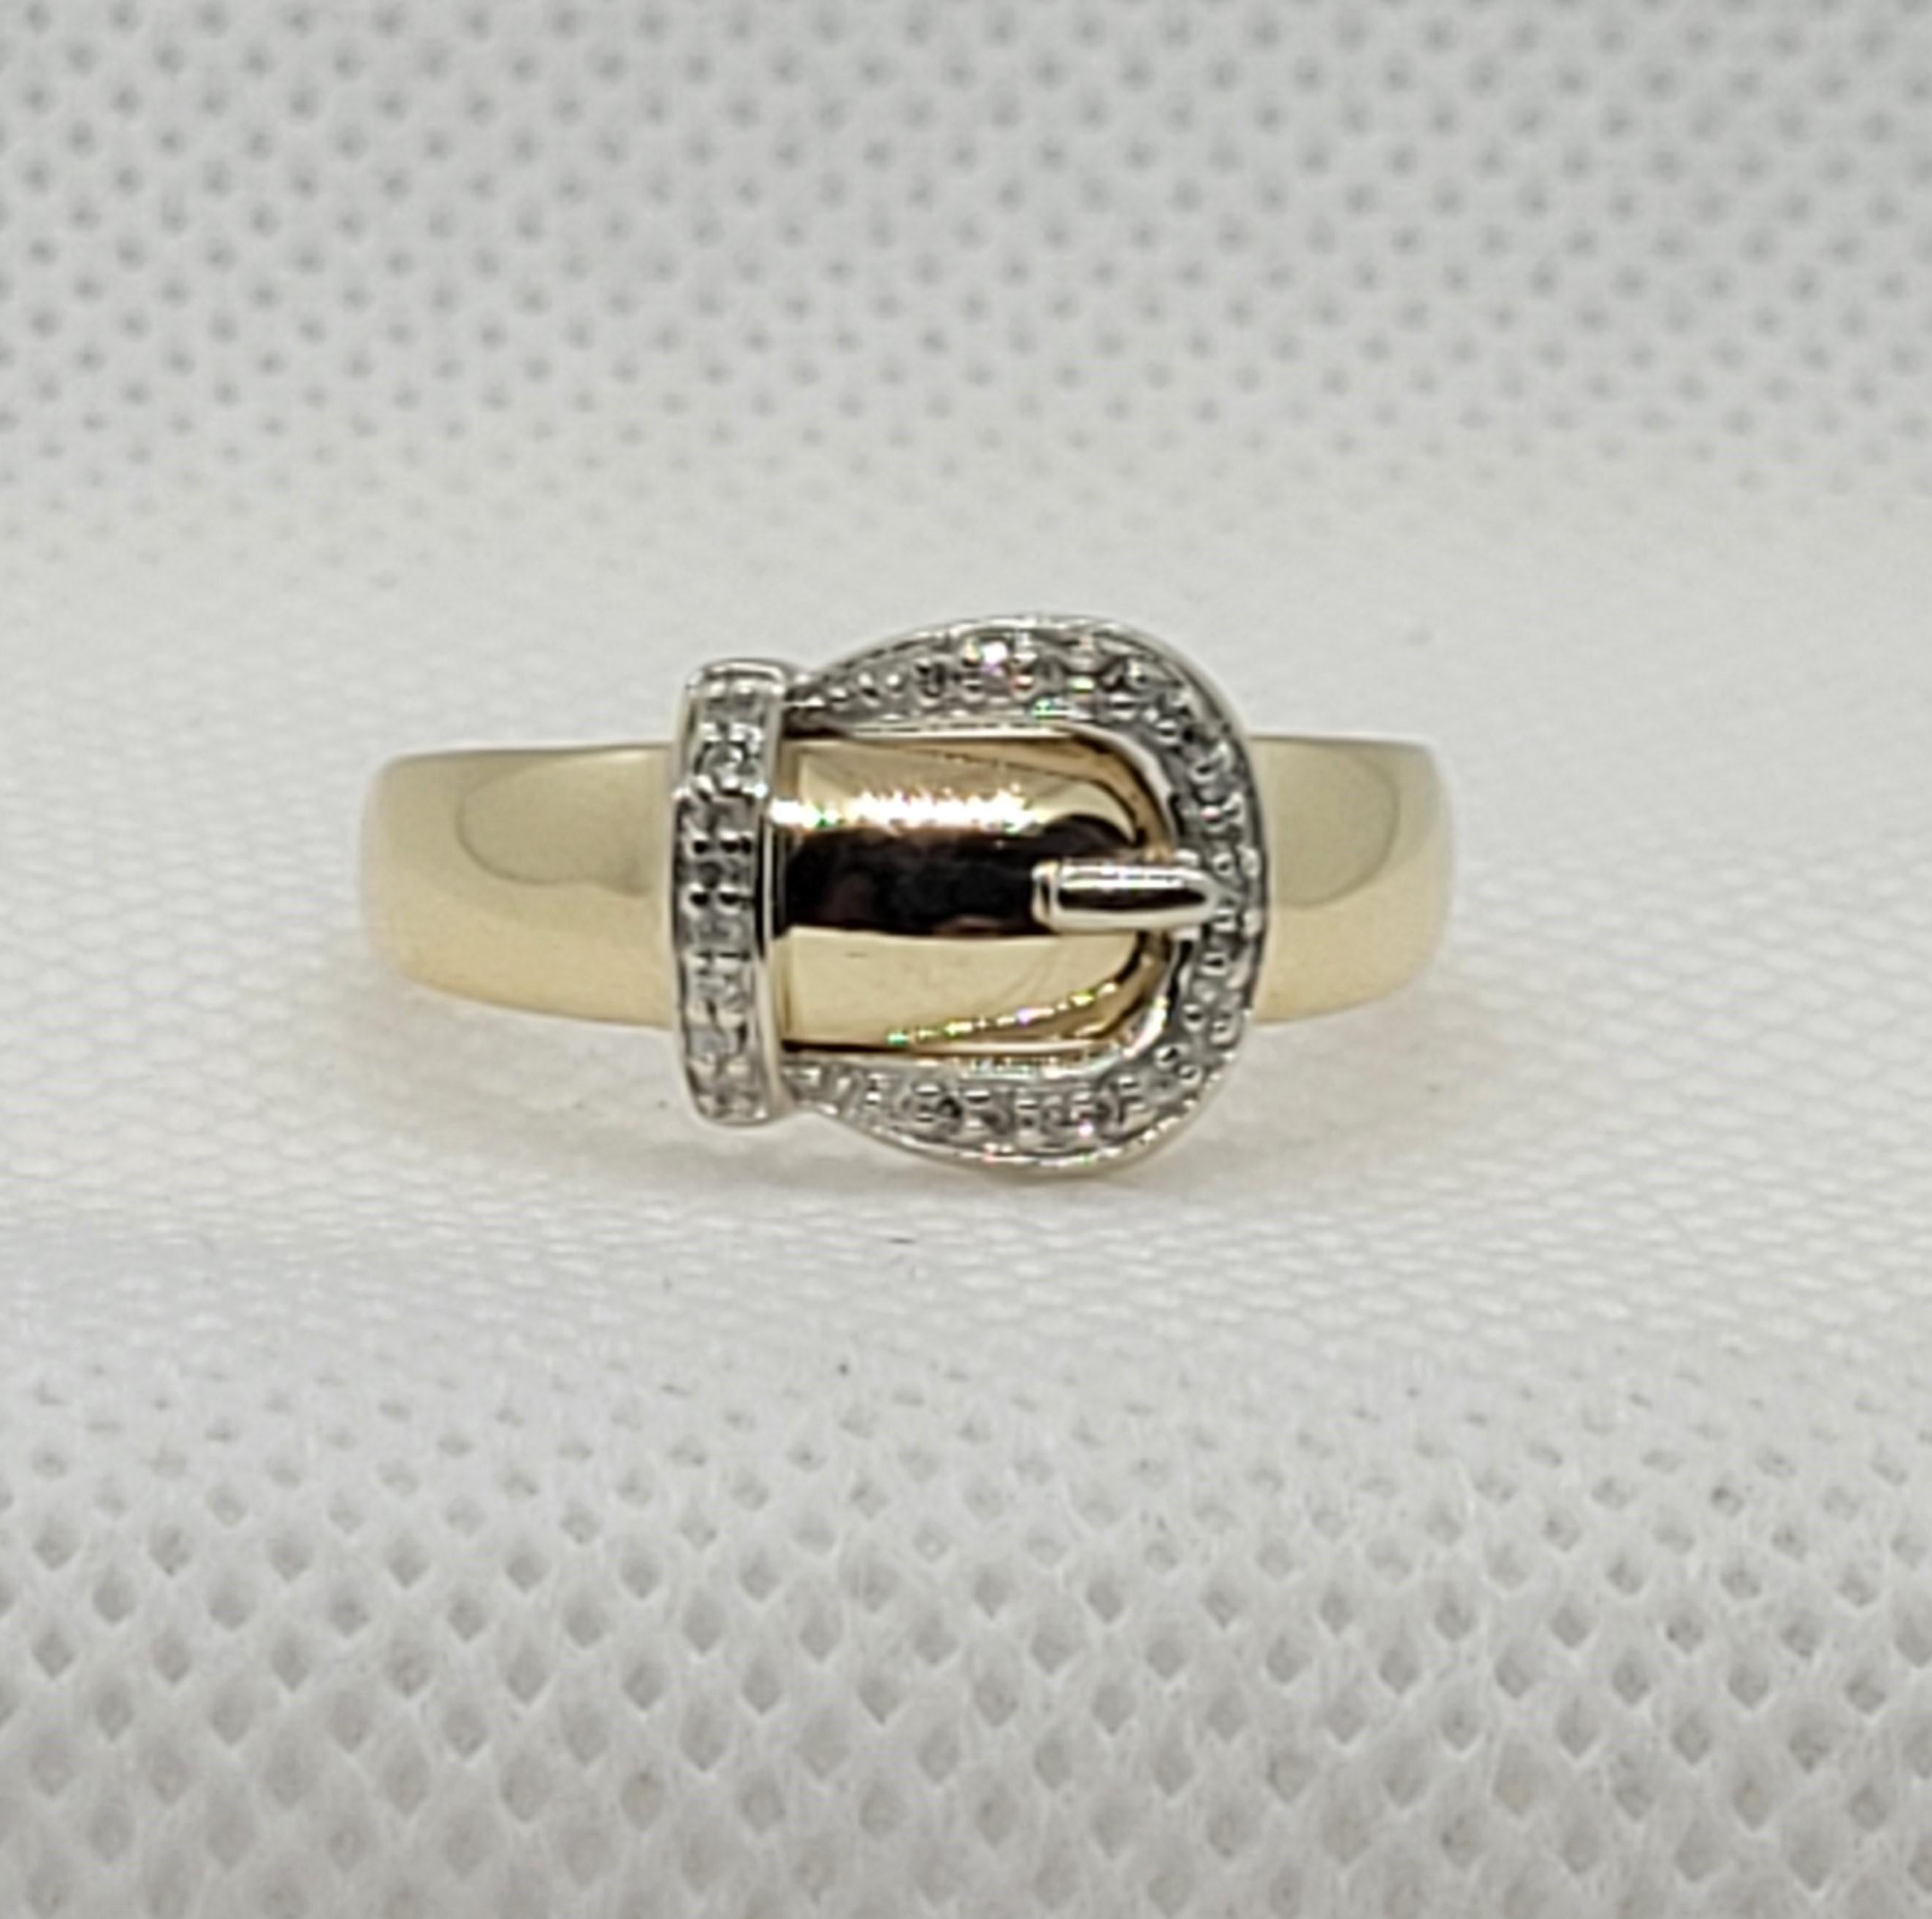 Stylish ladies 10kt two-tone gold ring with a belt buckle design accented with twenty-five single cut diamonds that are approximately .25cttw. The diamonds are prong set in white gold, H in color, and I in clarity. The ring is size 8, 3.2 grams, and